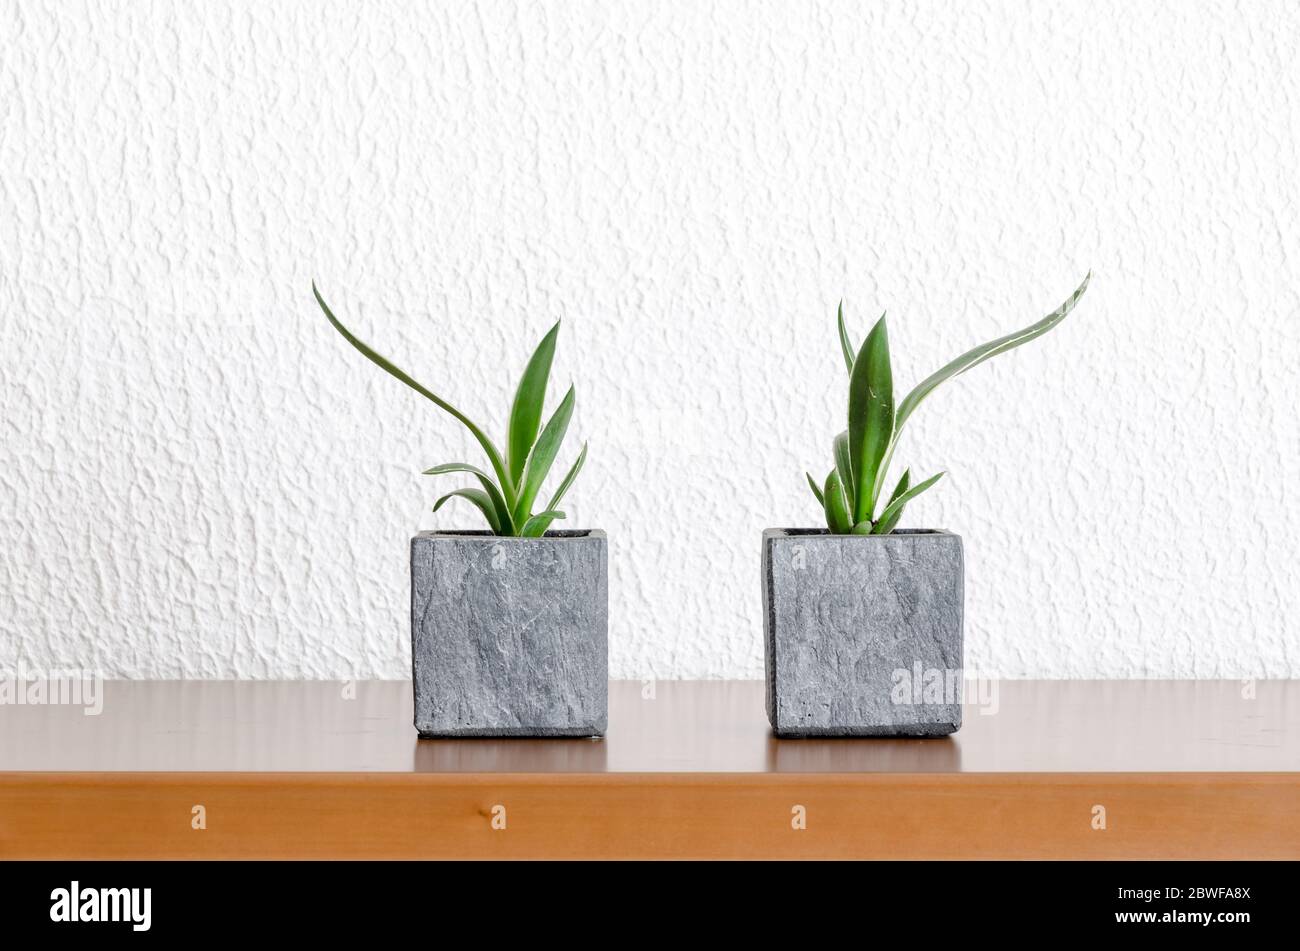 Simple and minimalistic still life with green plants in a plant pot or flowerpot on a wooden desk or table, interior decoration, indoors, front view Stock Photo